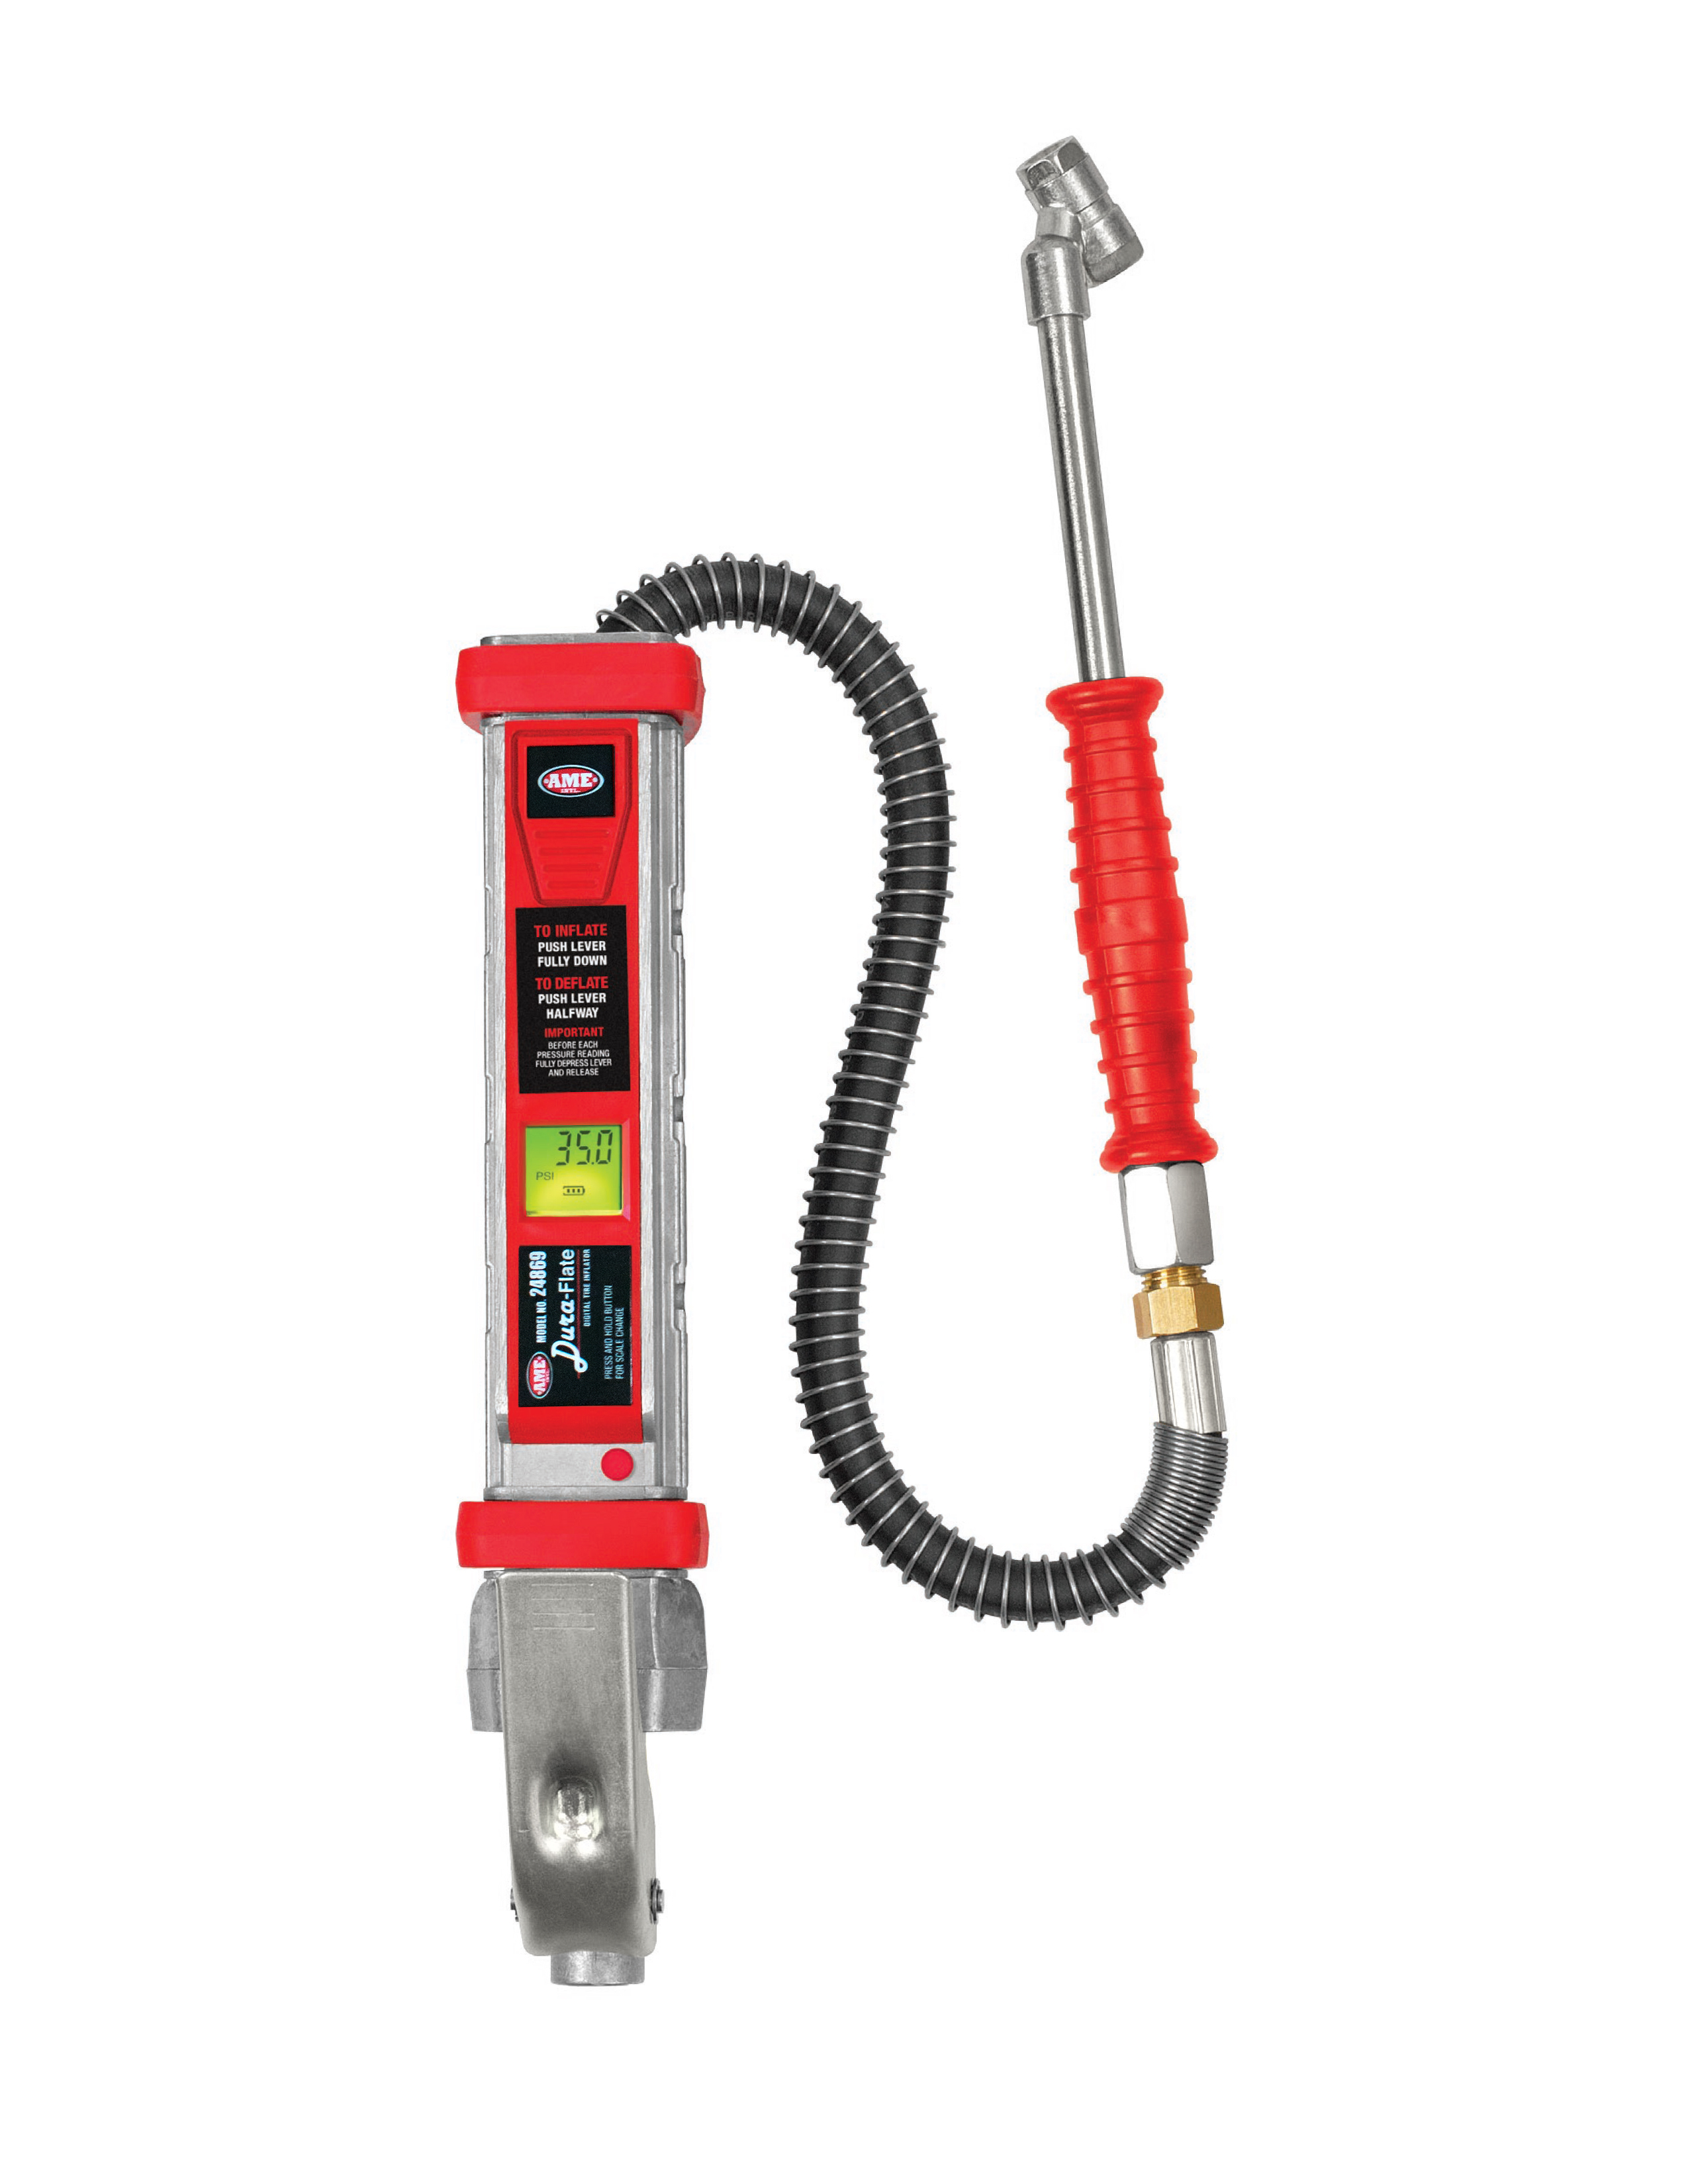 AME launches Dura-Flate tyre inflator